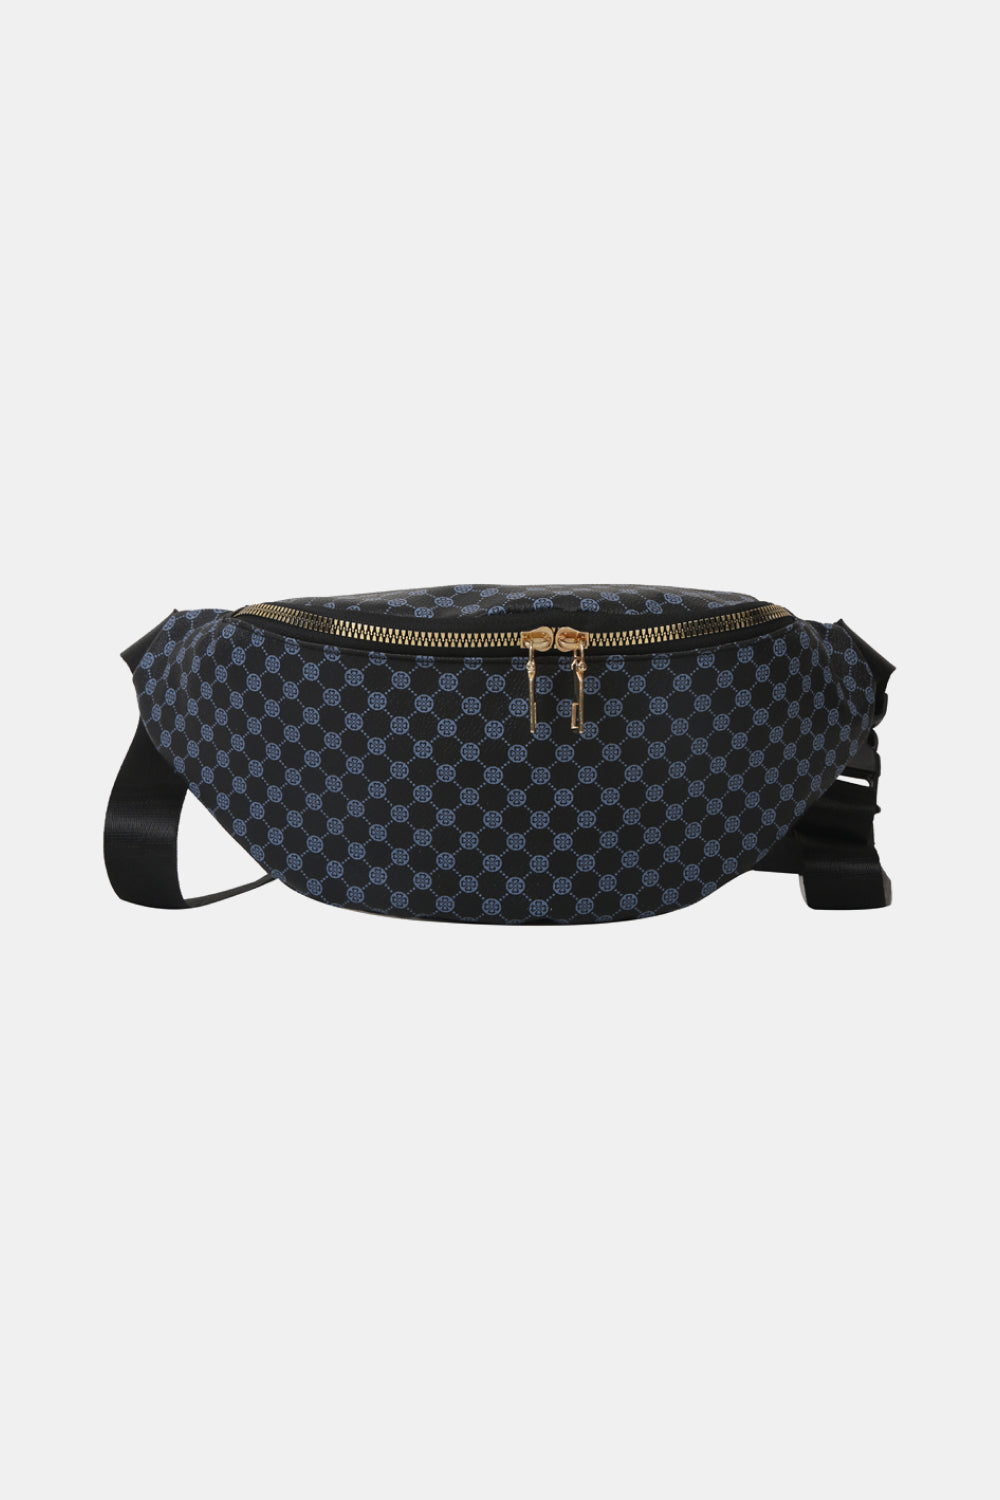 LOUIS VUITTON CASE FOR IPAD MINI IN LEATHER DAMIER CAMEL POUCH